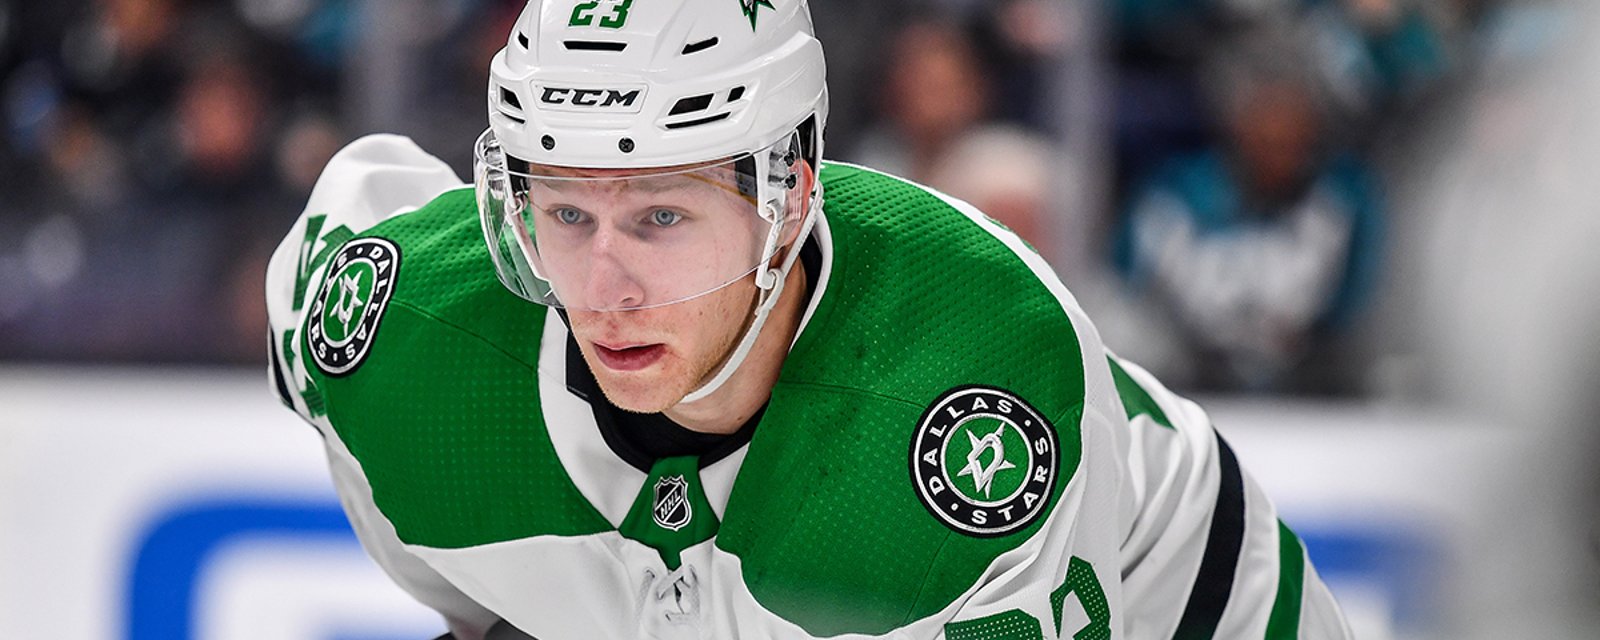 Breaking: Stars sign Lindell to new long-term contract